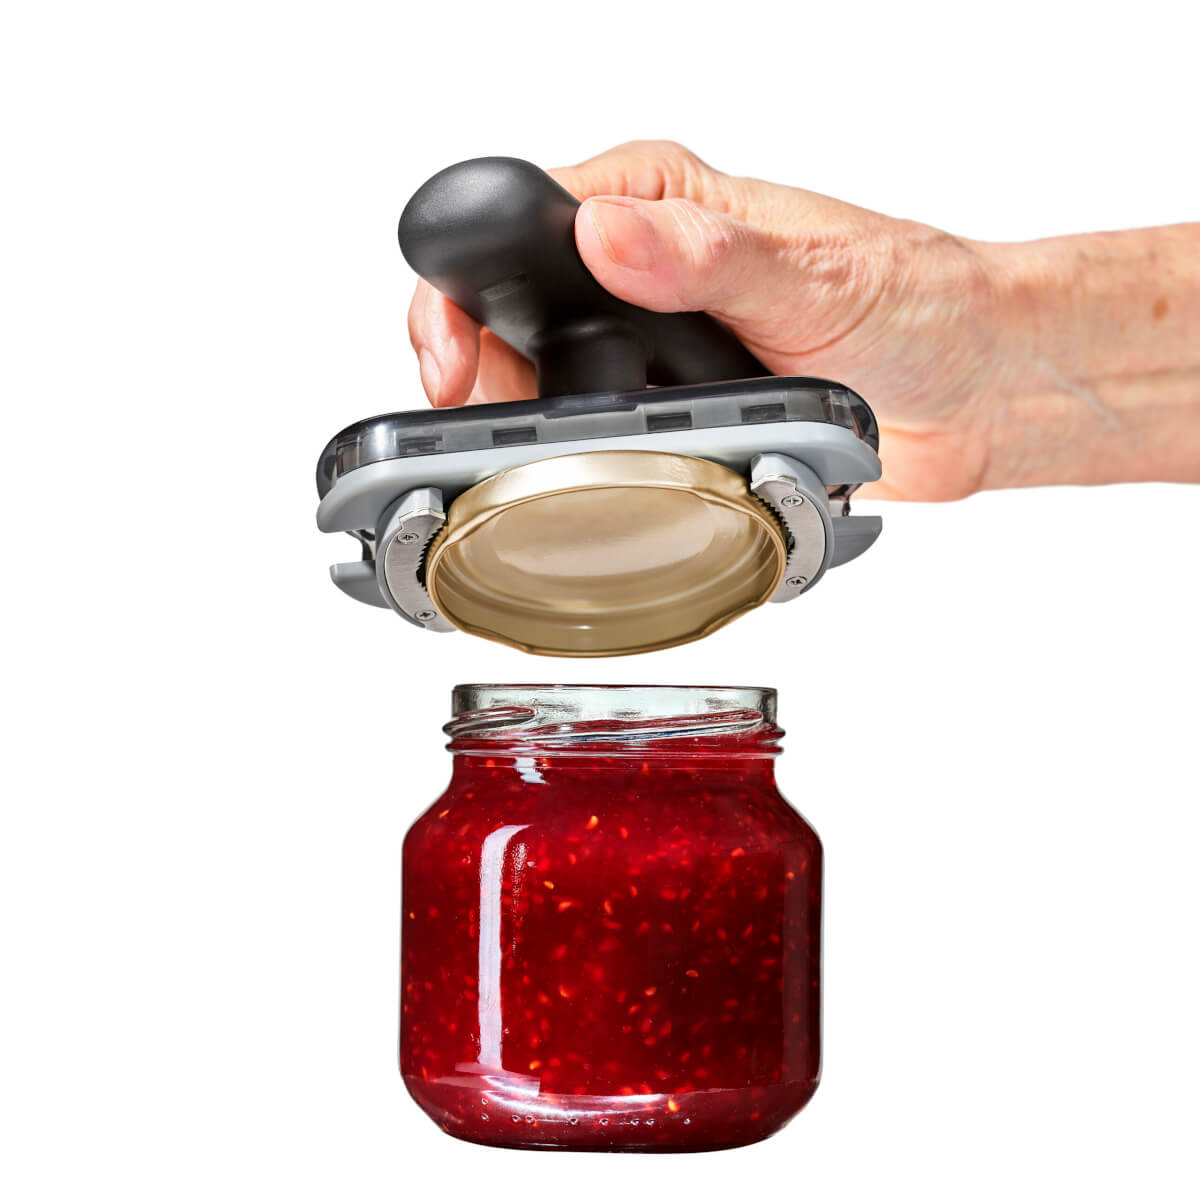  OXO Good Grips Jar Opener with Base Pad : Home & Kitchen